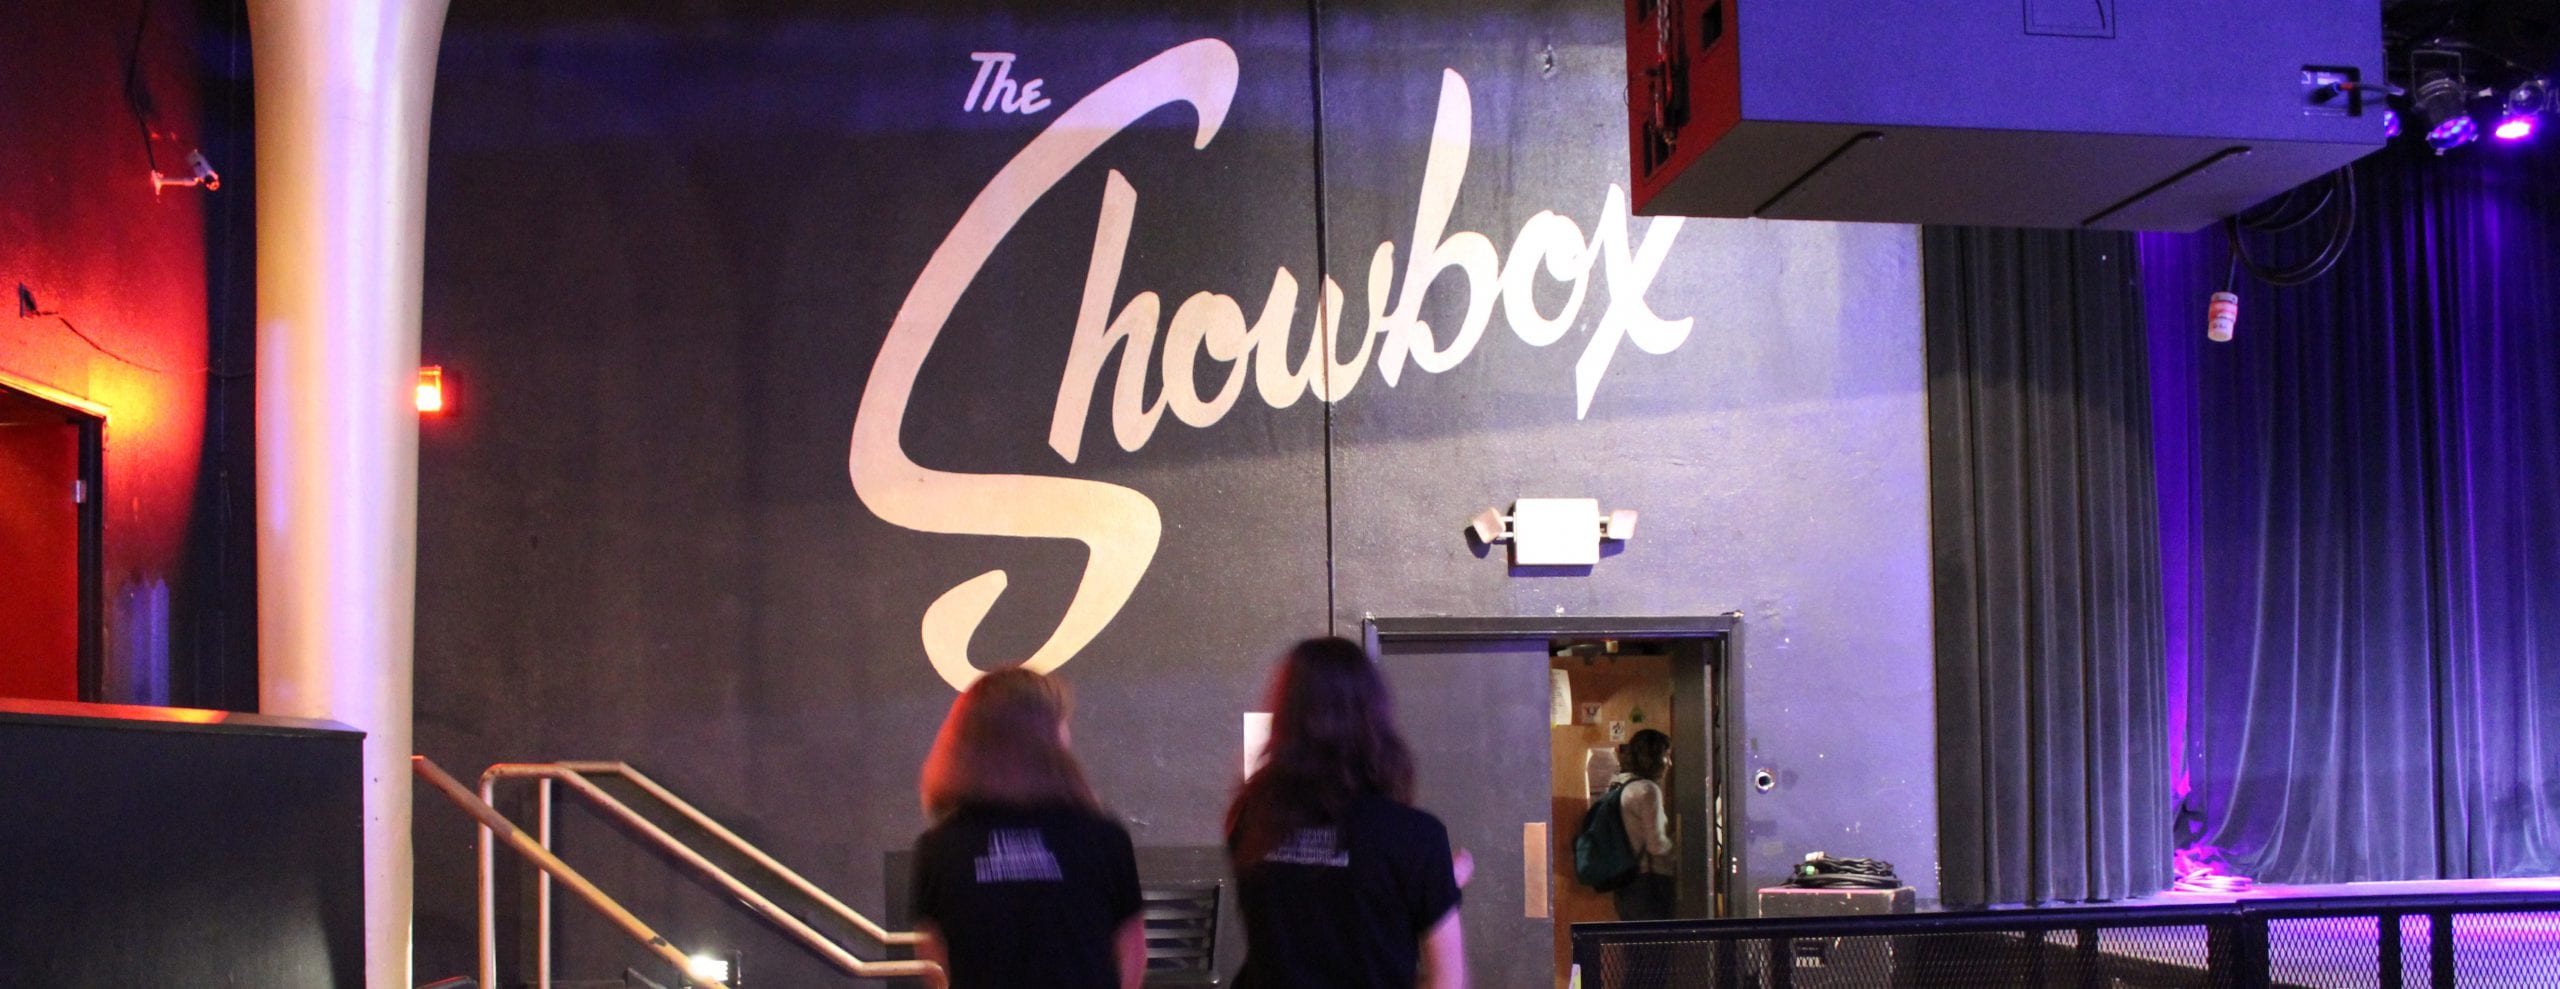 Two women in "Save The Showbox" shirts stand beside each other, looking a black wall inside The Showbox. On the wall are the words "The Showbox" in large, white letters.